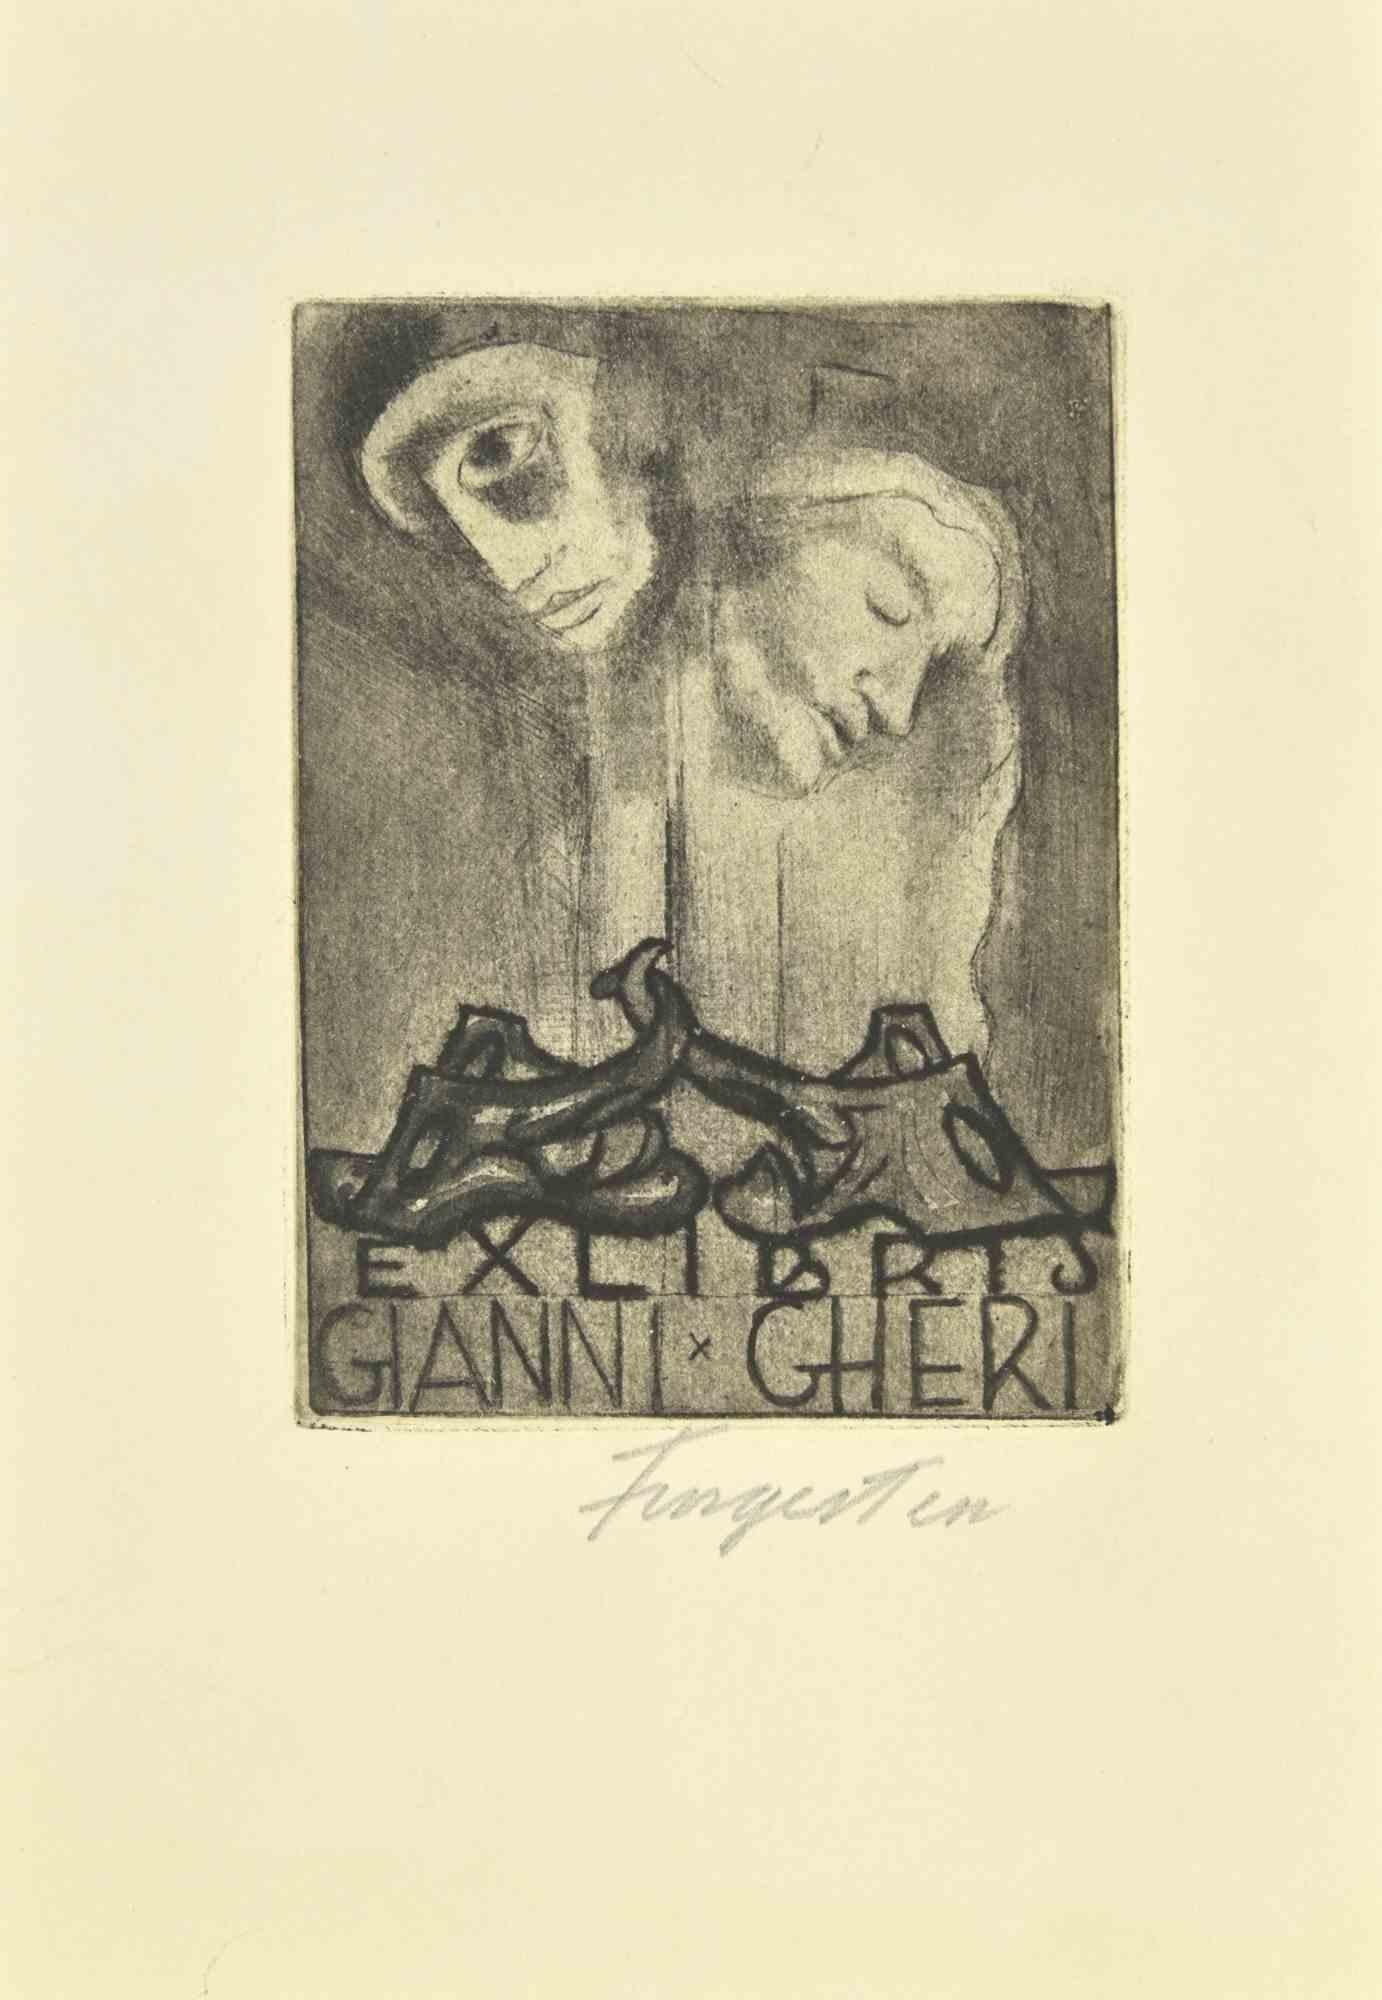 Ex Libris - Gianni Gheri is an Etching print created by  Michel Fingesten.

Hand Signed on the lower right margin.

Very good condition.

Michel Fingesten (1884 - 1943) was a Czech painter and engraver of Jewish origin. He is considered one of the